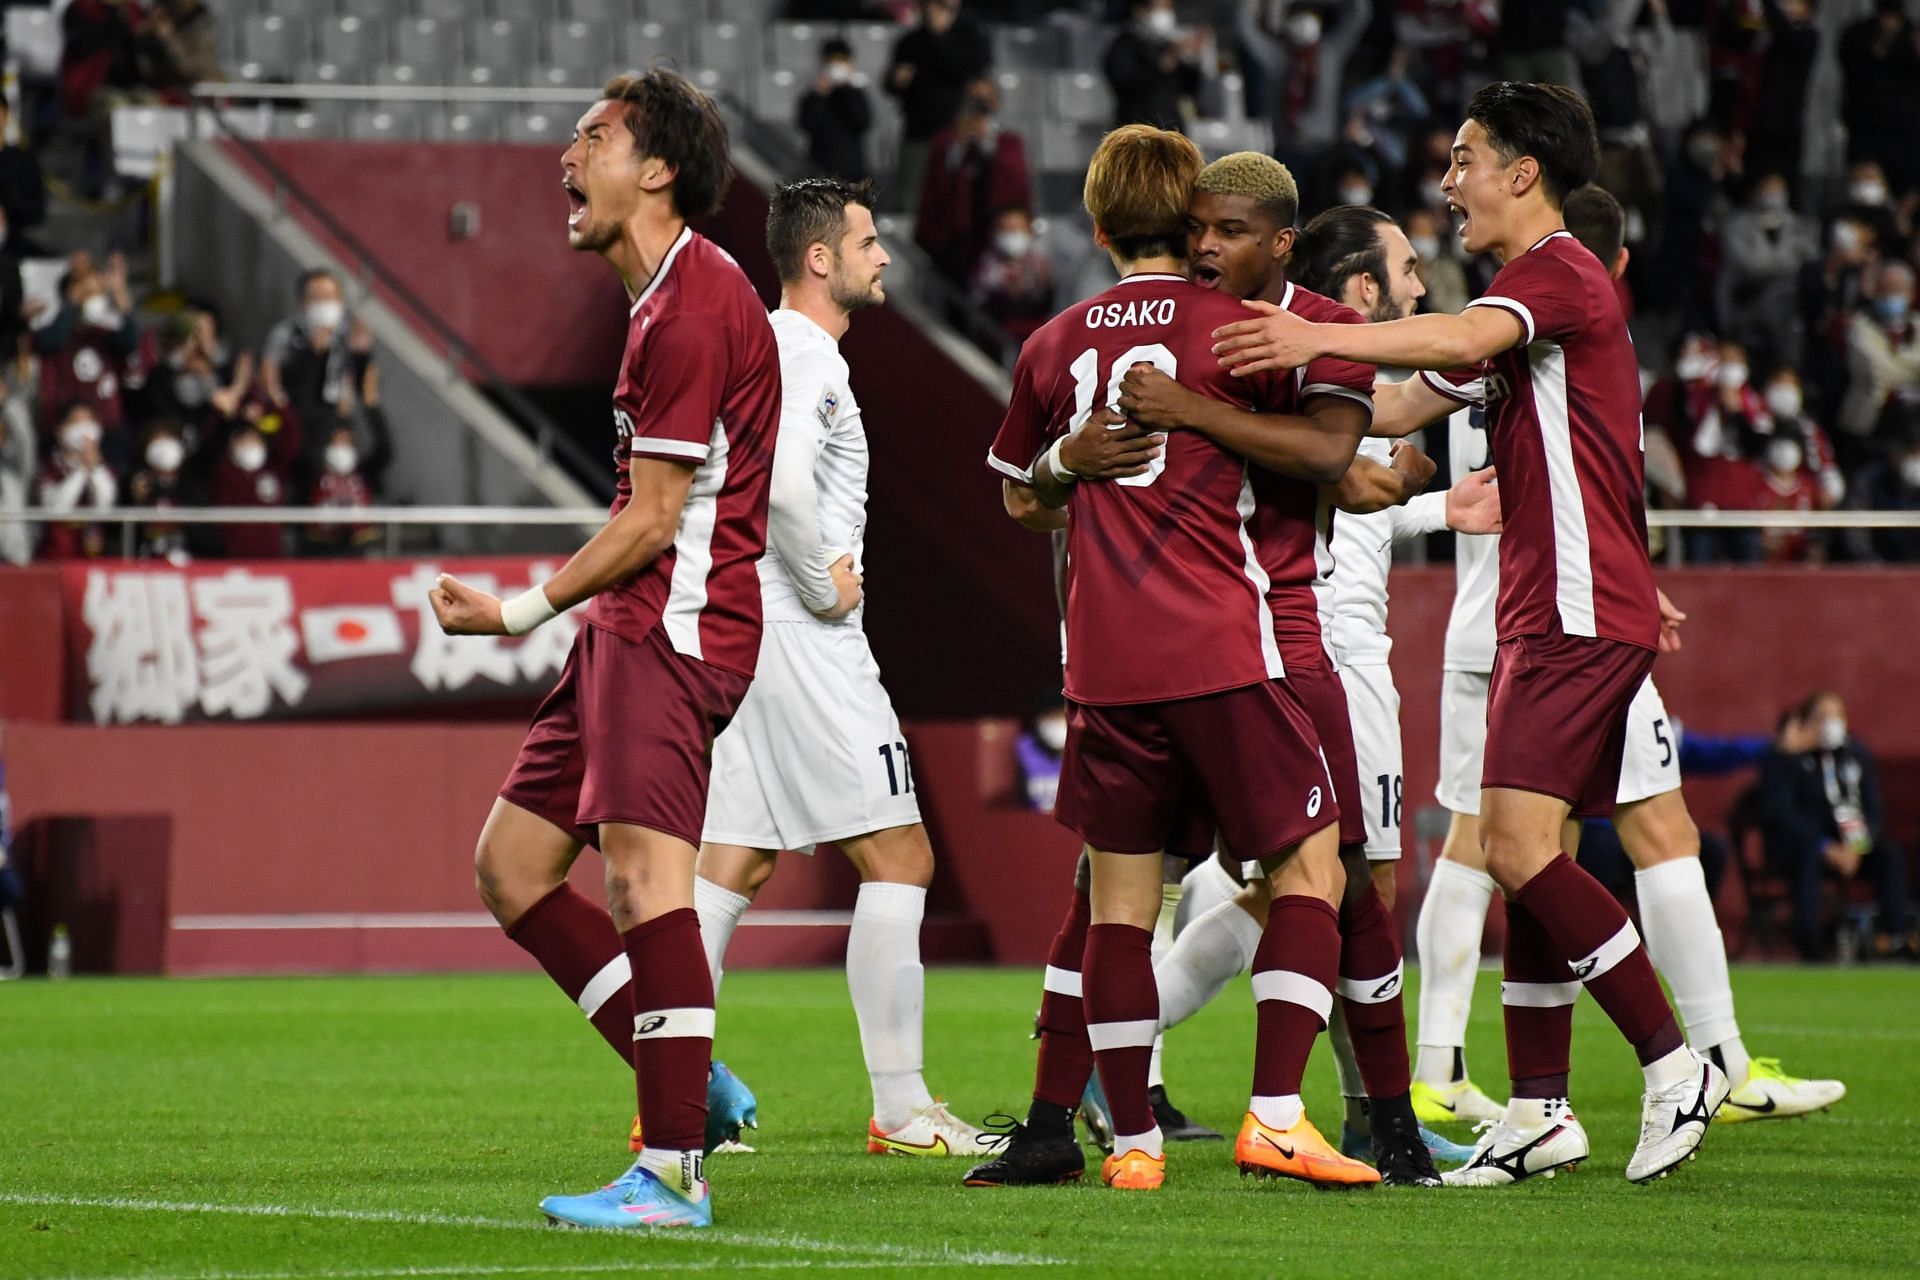 Vissel Kobe face FC Tokyo in their upcoming J1 League fixture on Wednesday